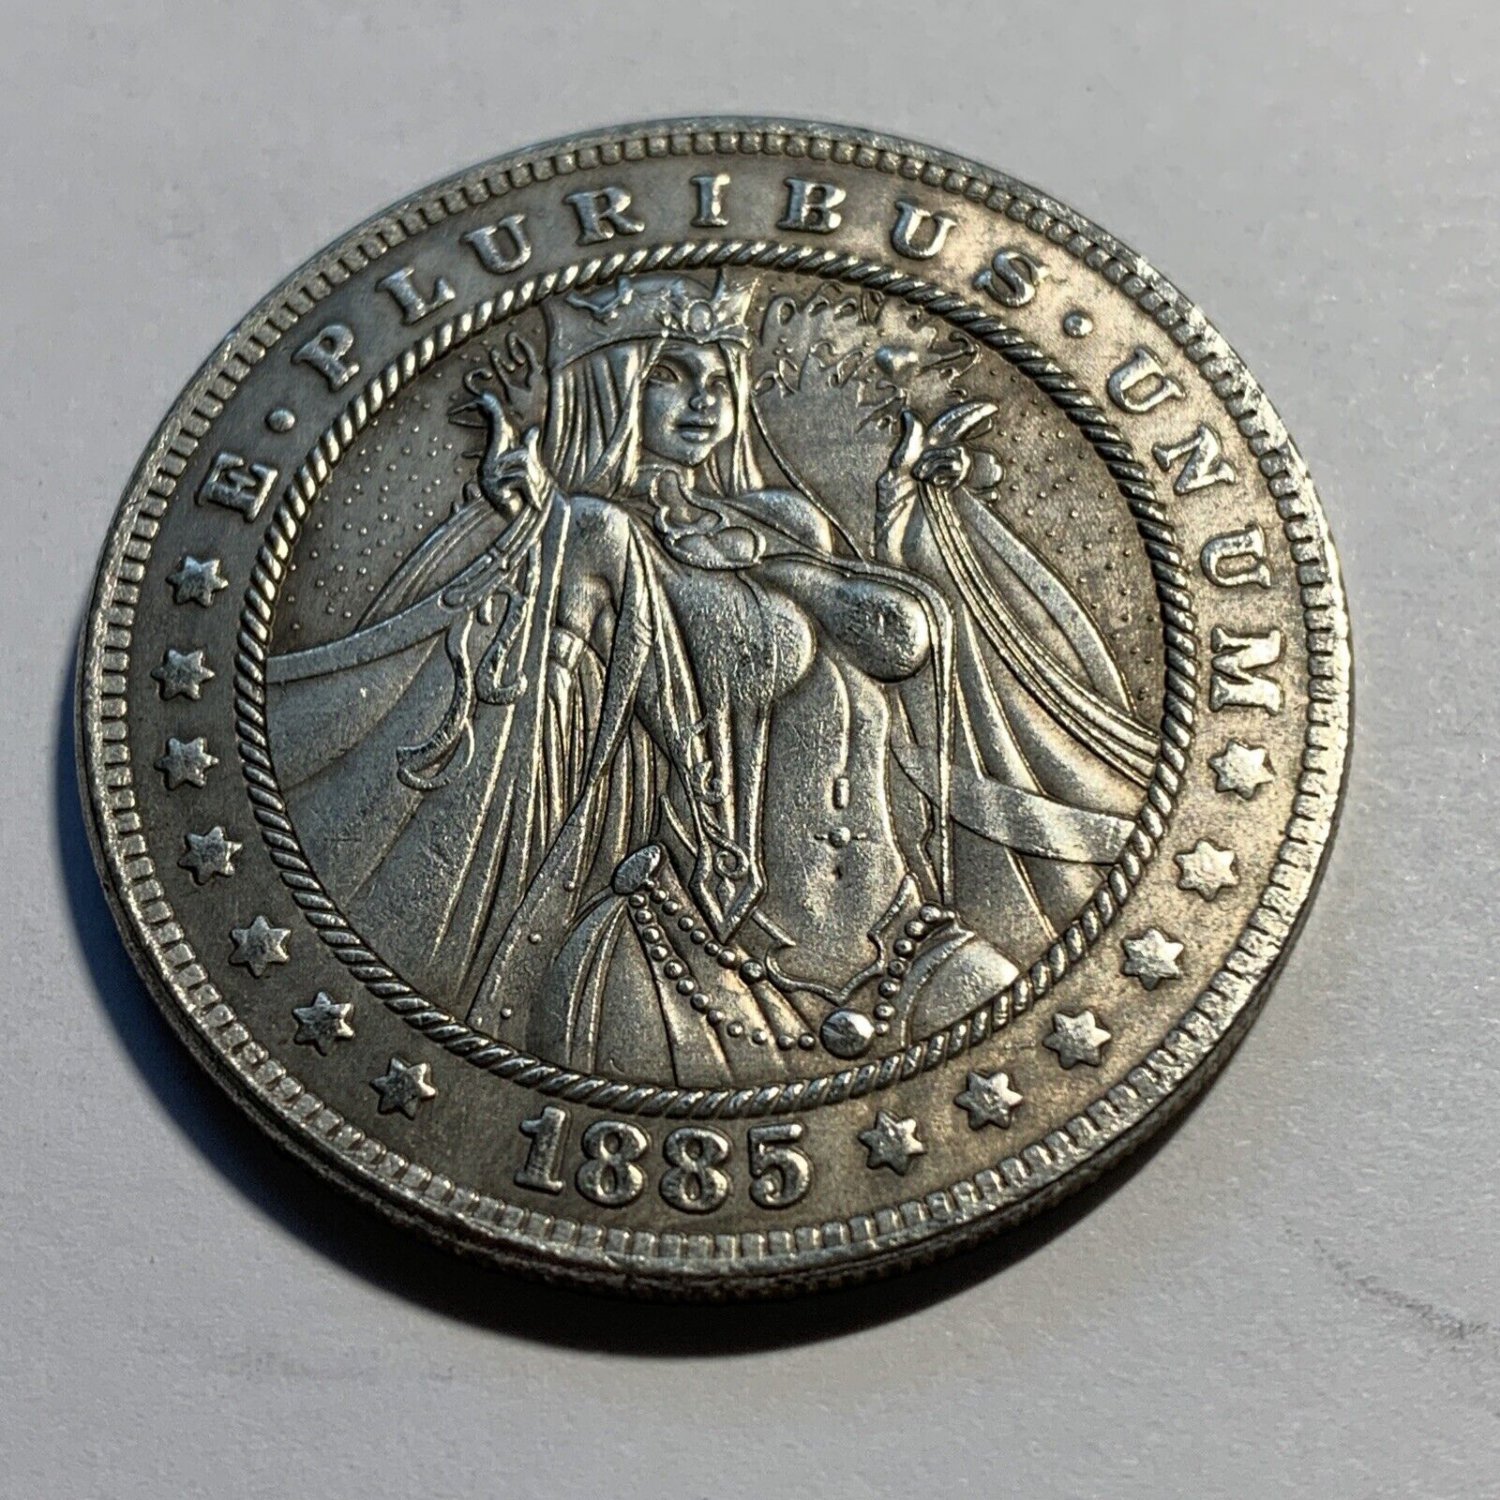 Sexy Queen Has Arrived Novelty Good Luck Heads Tails Challenge Coin 4982